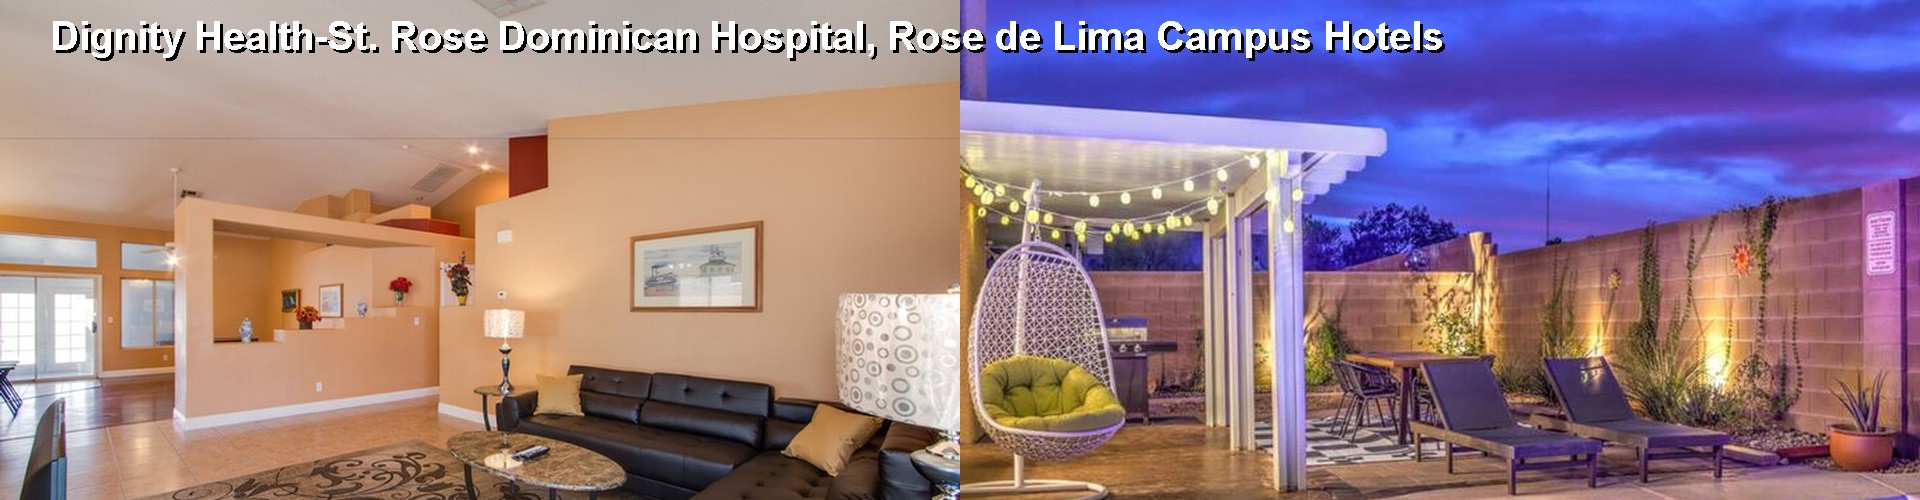 5 Best Hotels near Dignity Health-St. Rose Dominican Hospital, Rose de Lima Campus